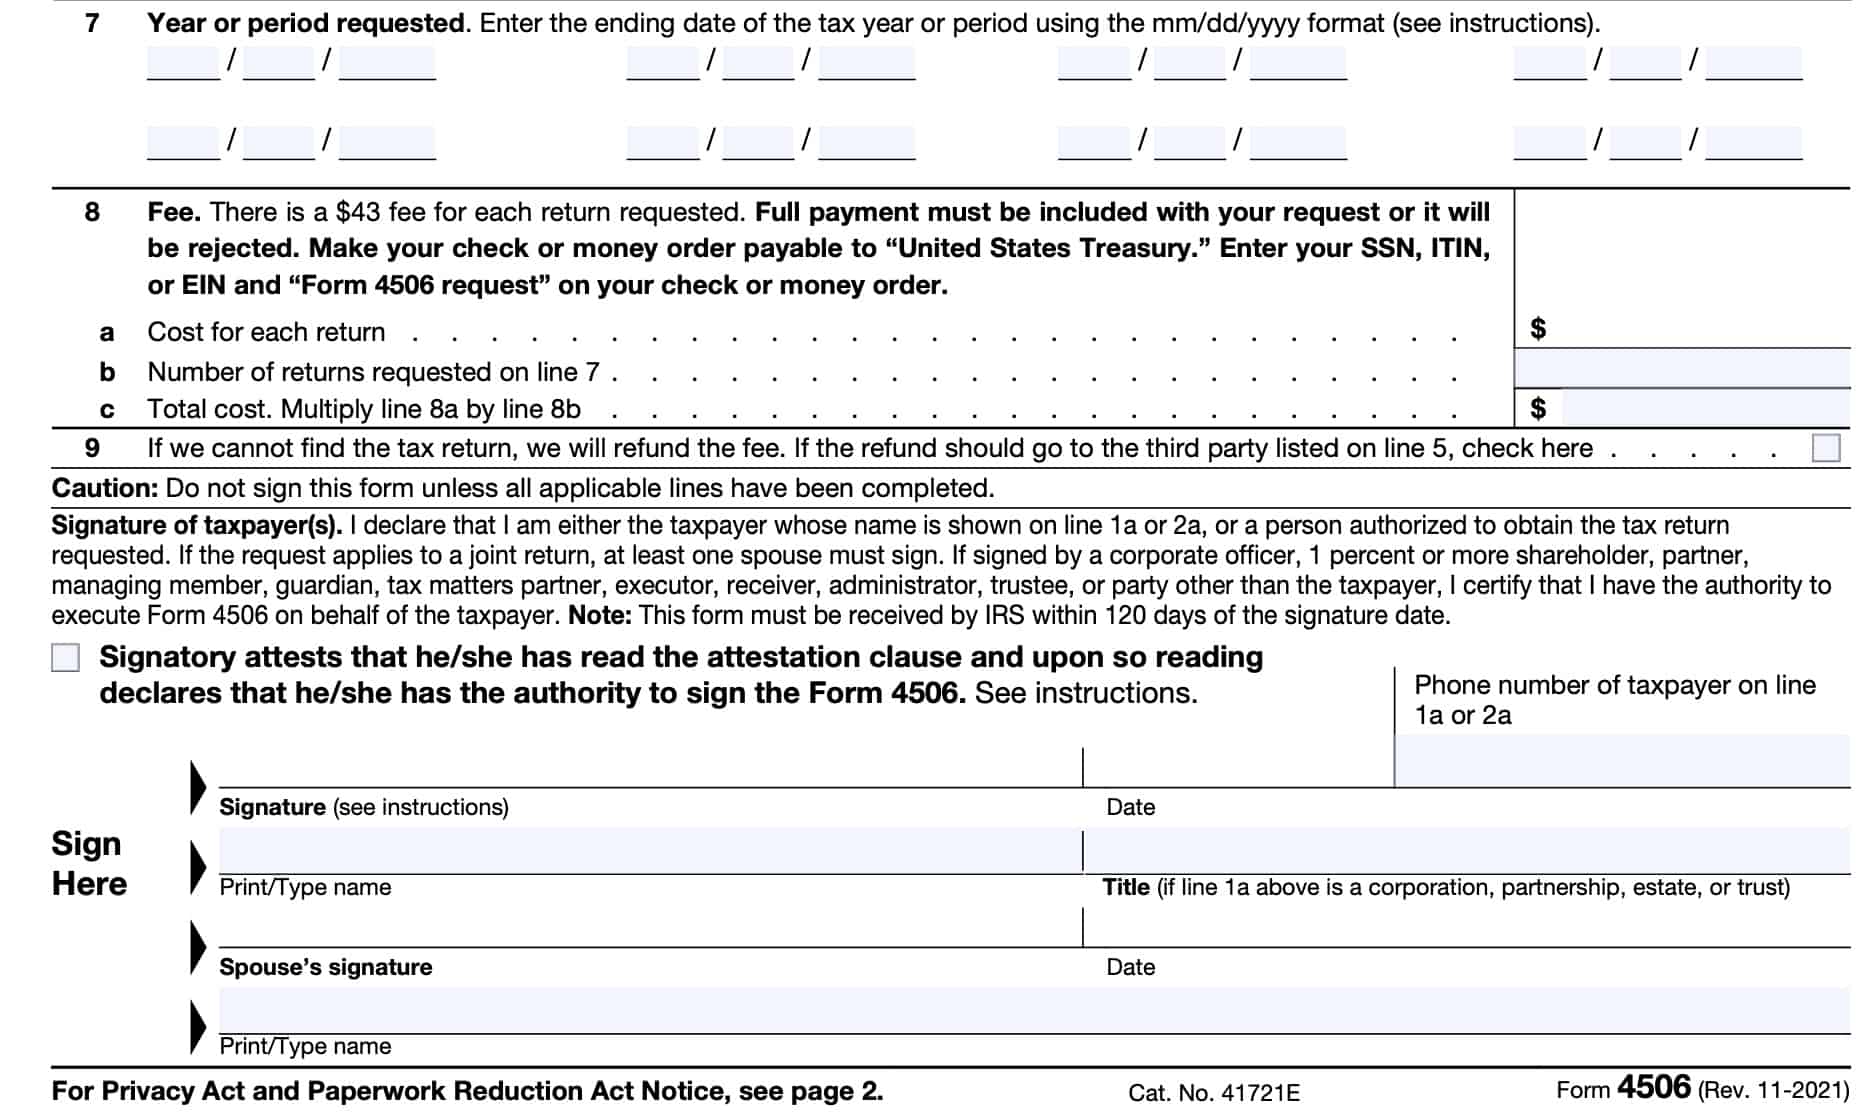 irs form 4506, lines 7-9